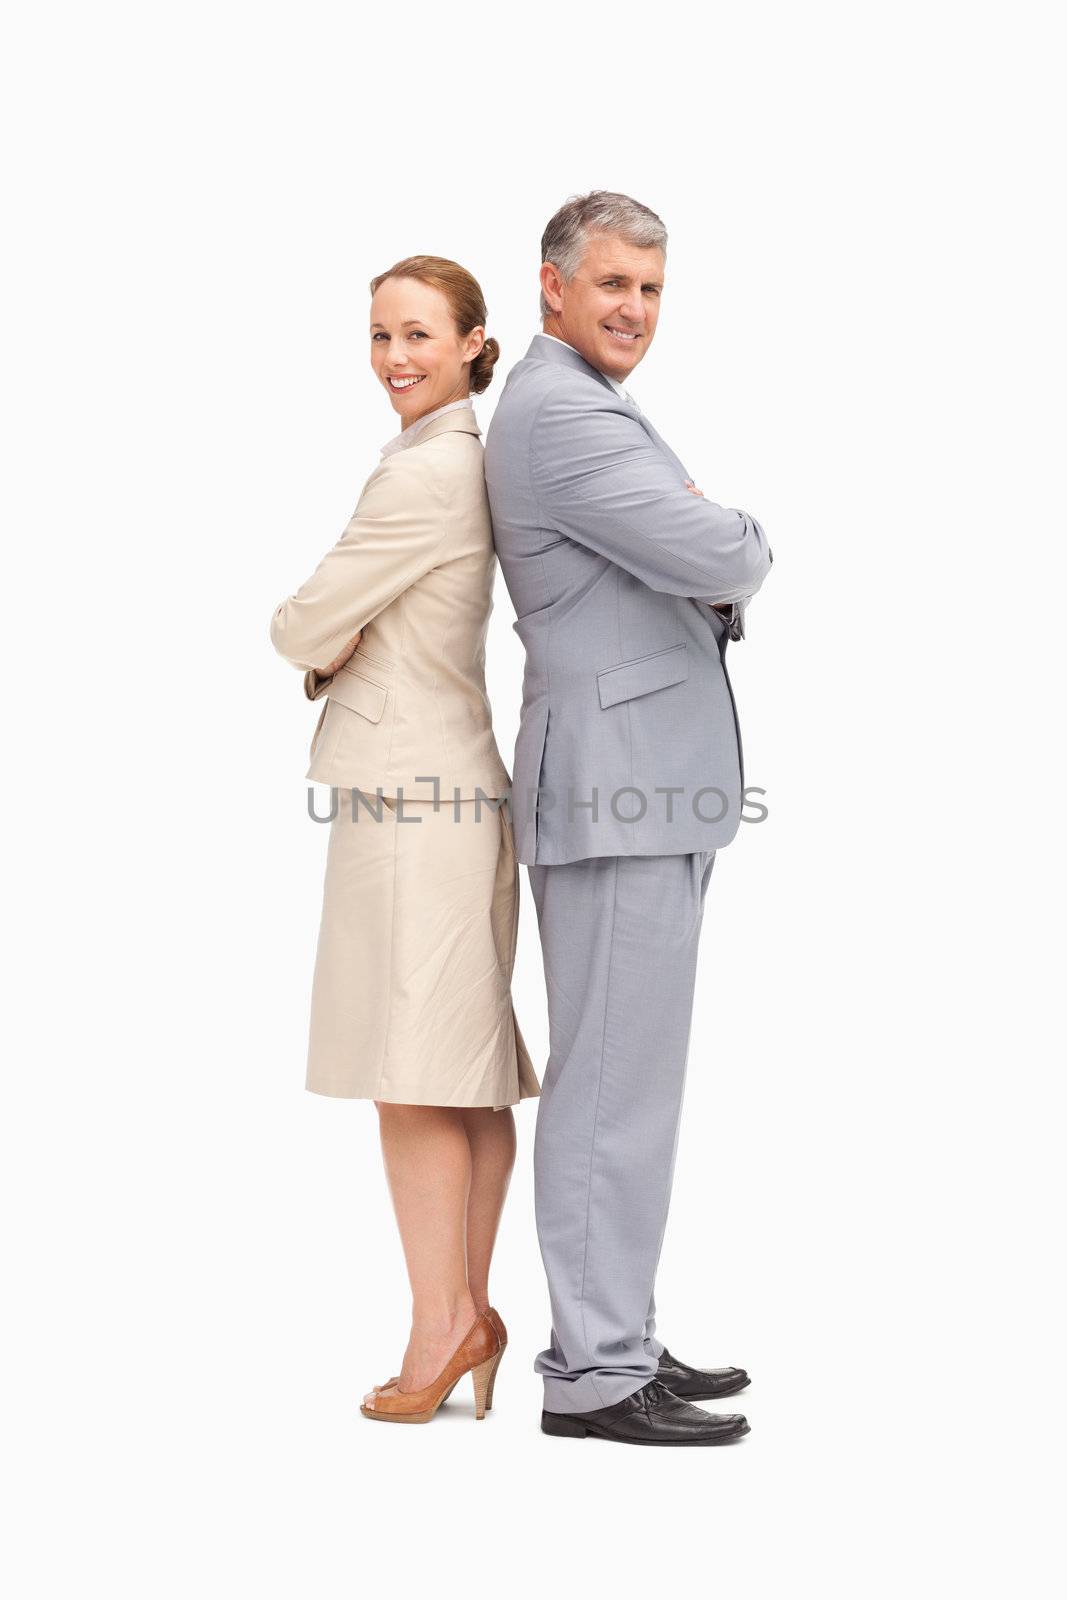 Portrait of smiling business people back to back against white background